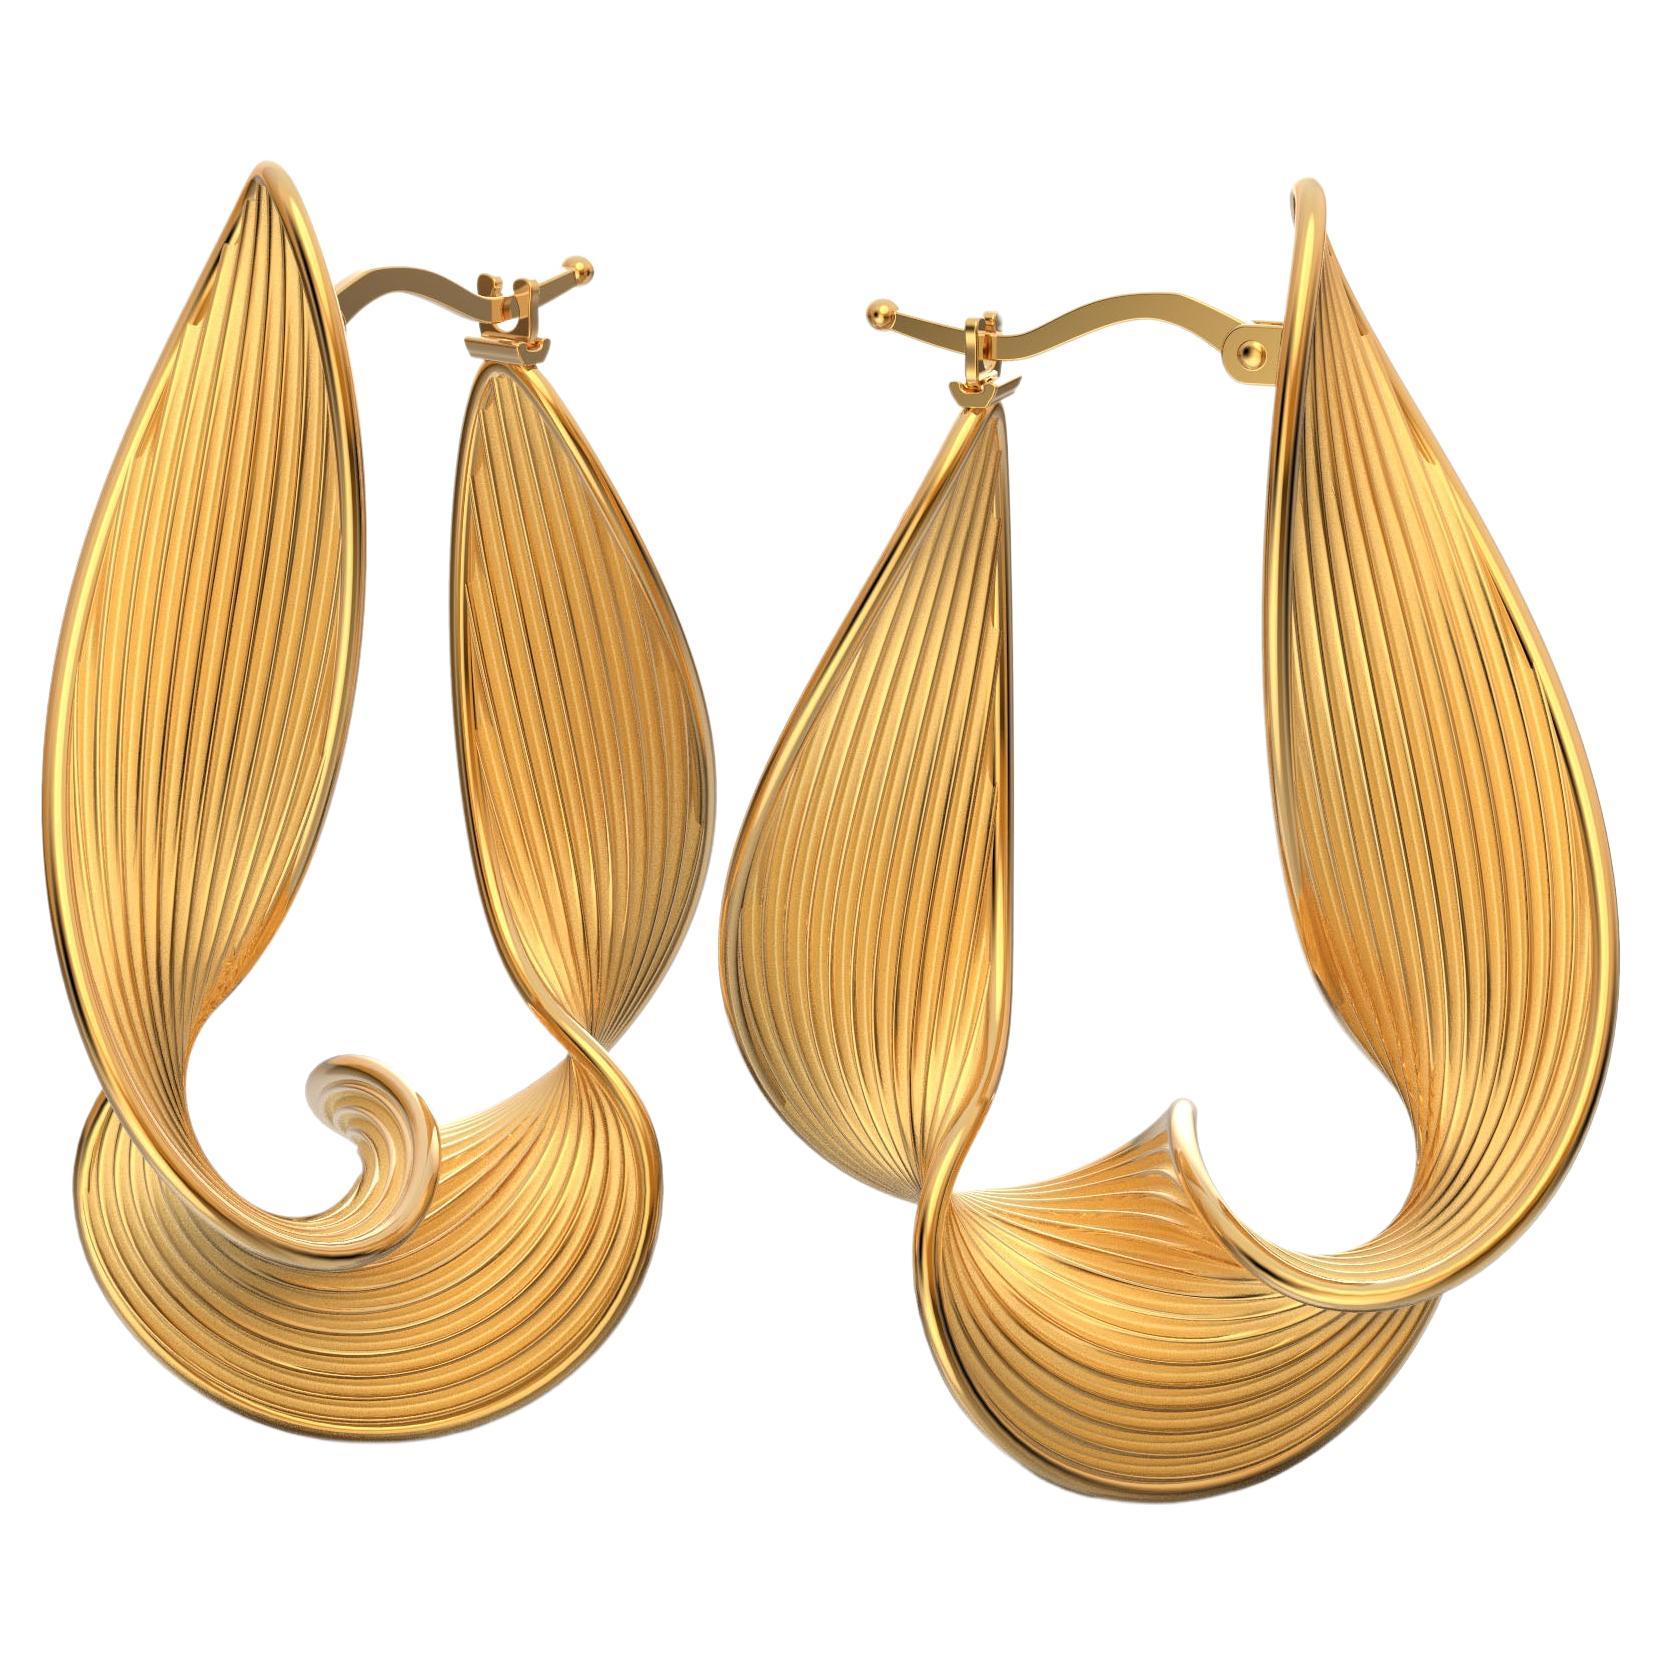 Discover our exclusive made-to-order Statement Twisted Hoop Earrings in 14k gold, meticulously handcrafted in Italy by Oltremare Gioielli. These unique, long twisted hoops feature a captivating ribbed surface and polished edges, embodying a perfect